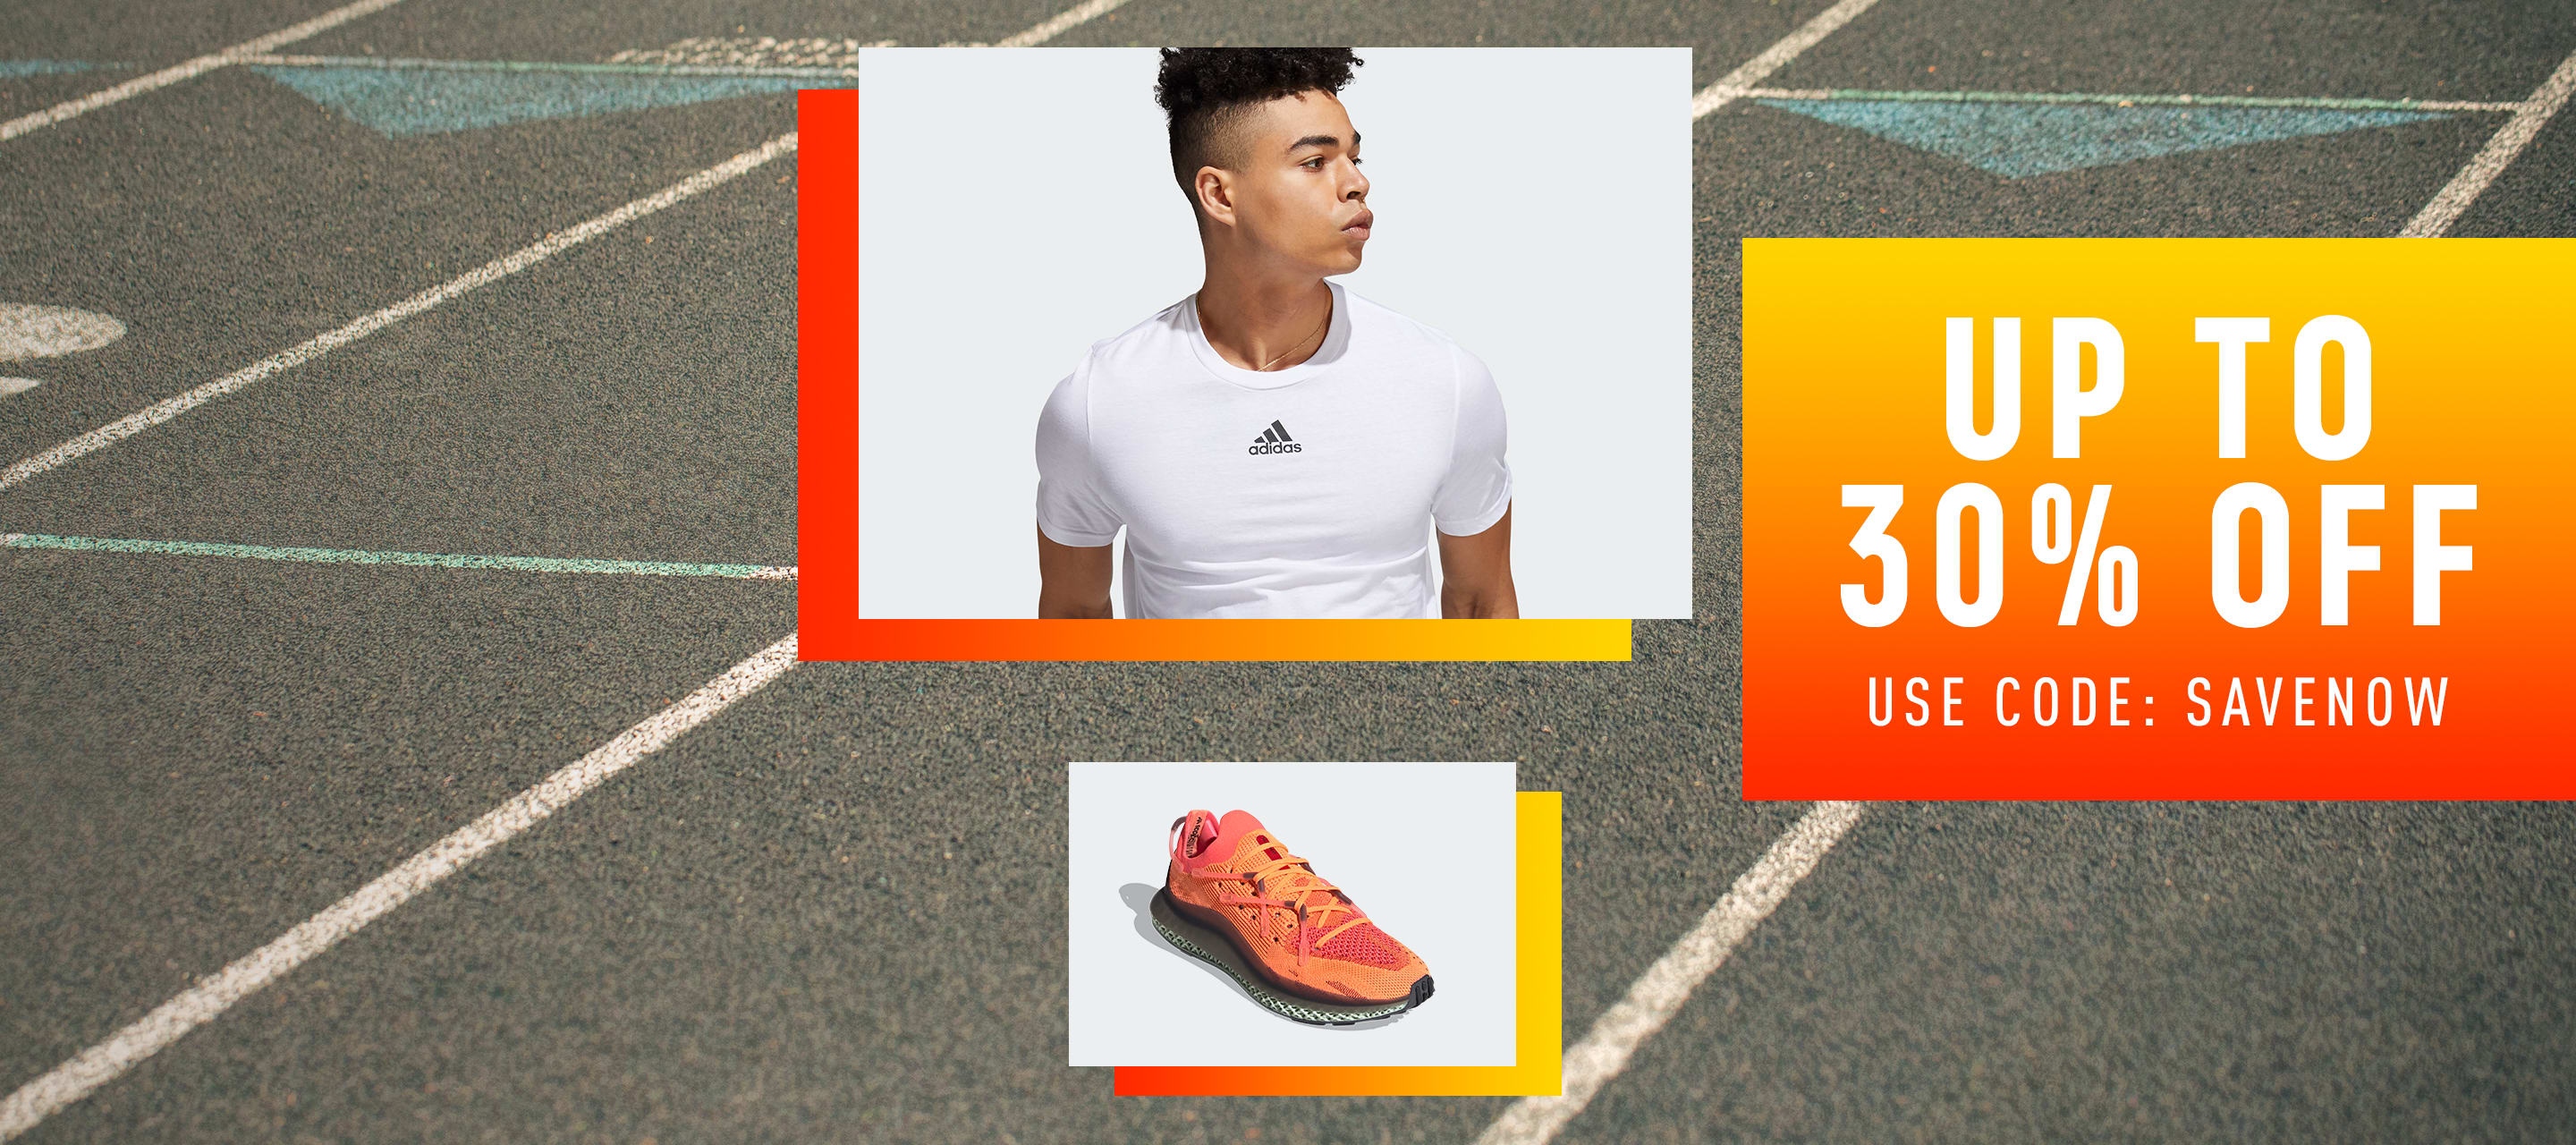 Mens Shoes, Clothing and Accessories | adidas US